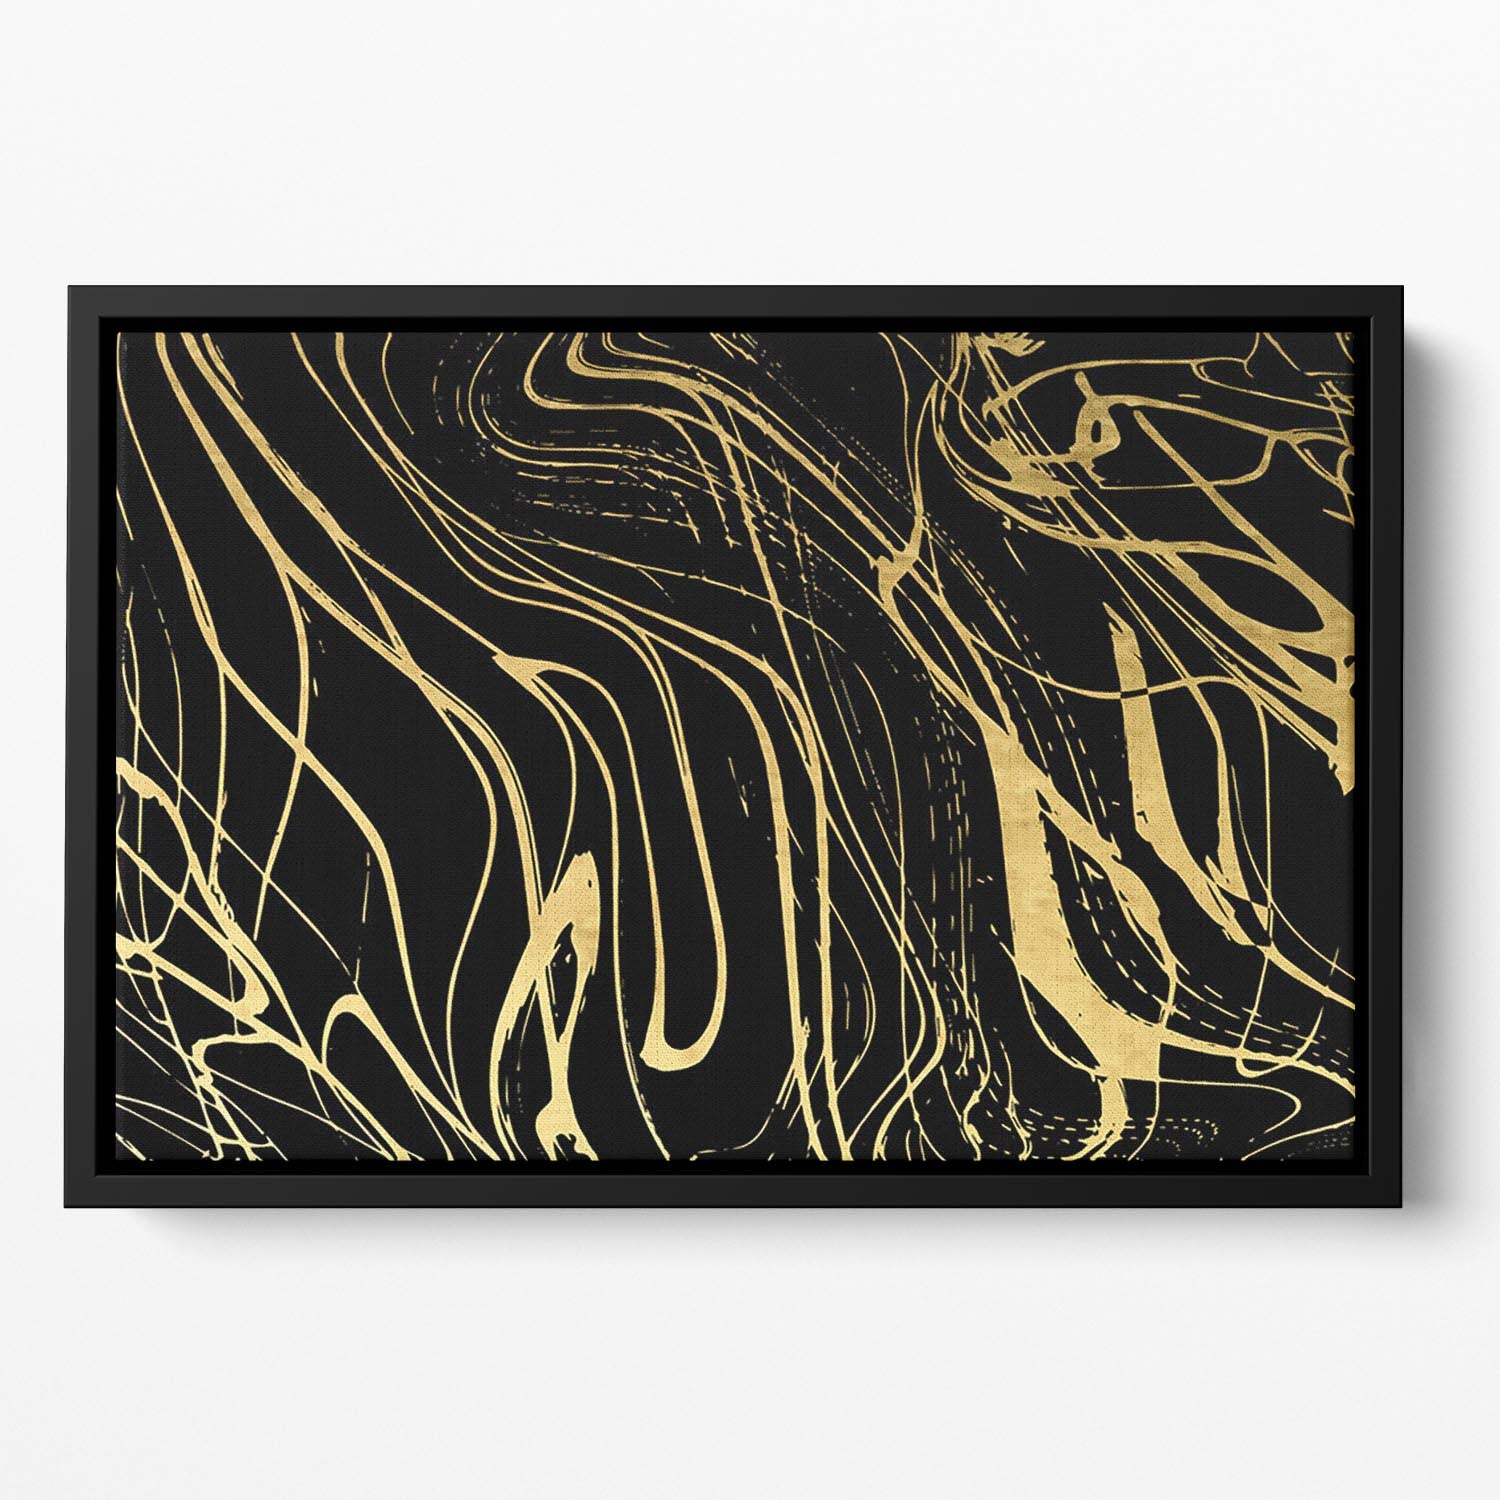 Black and Gold Swirled Abstract Floating Framed Canvas - Canvas Art Rocks - 2